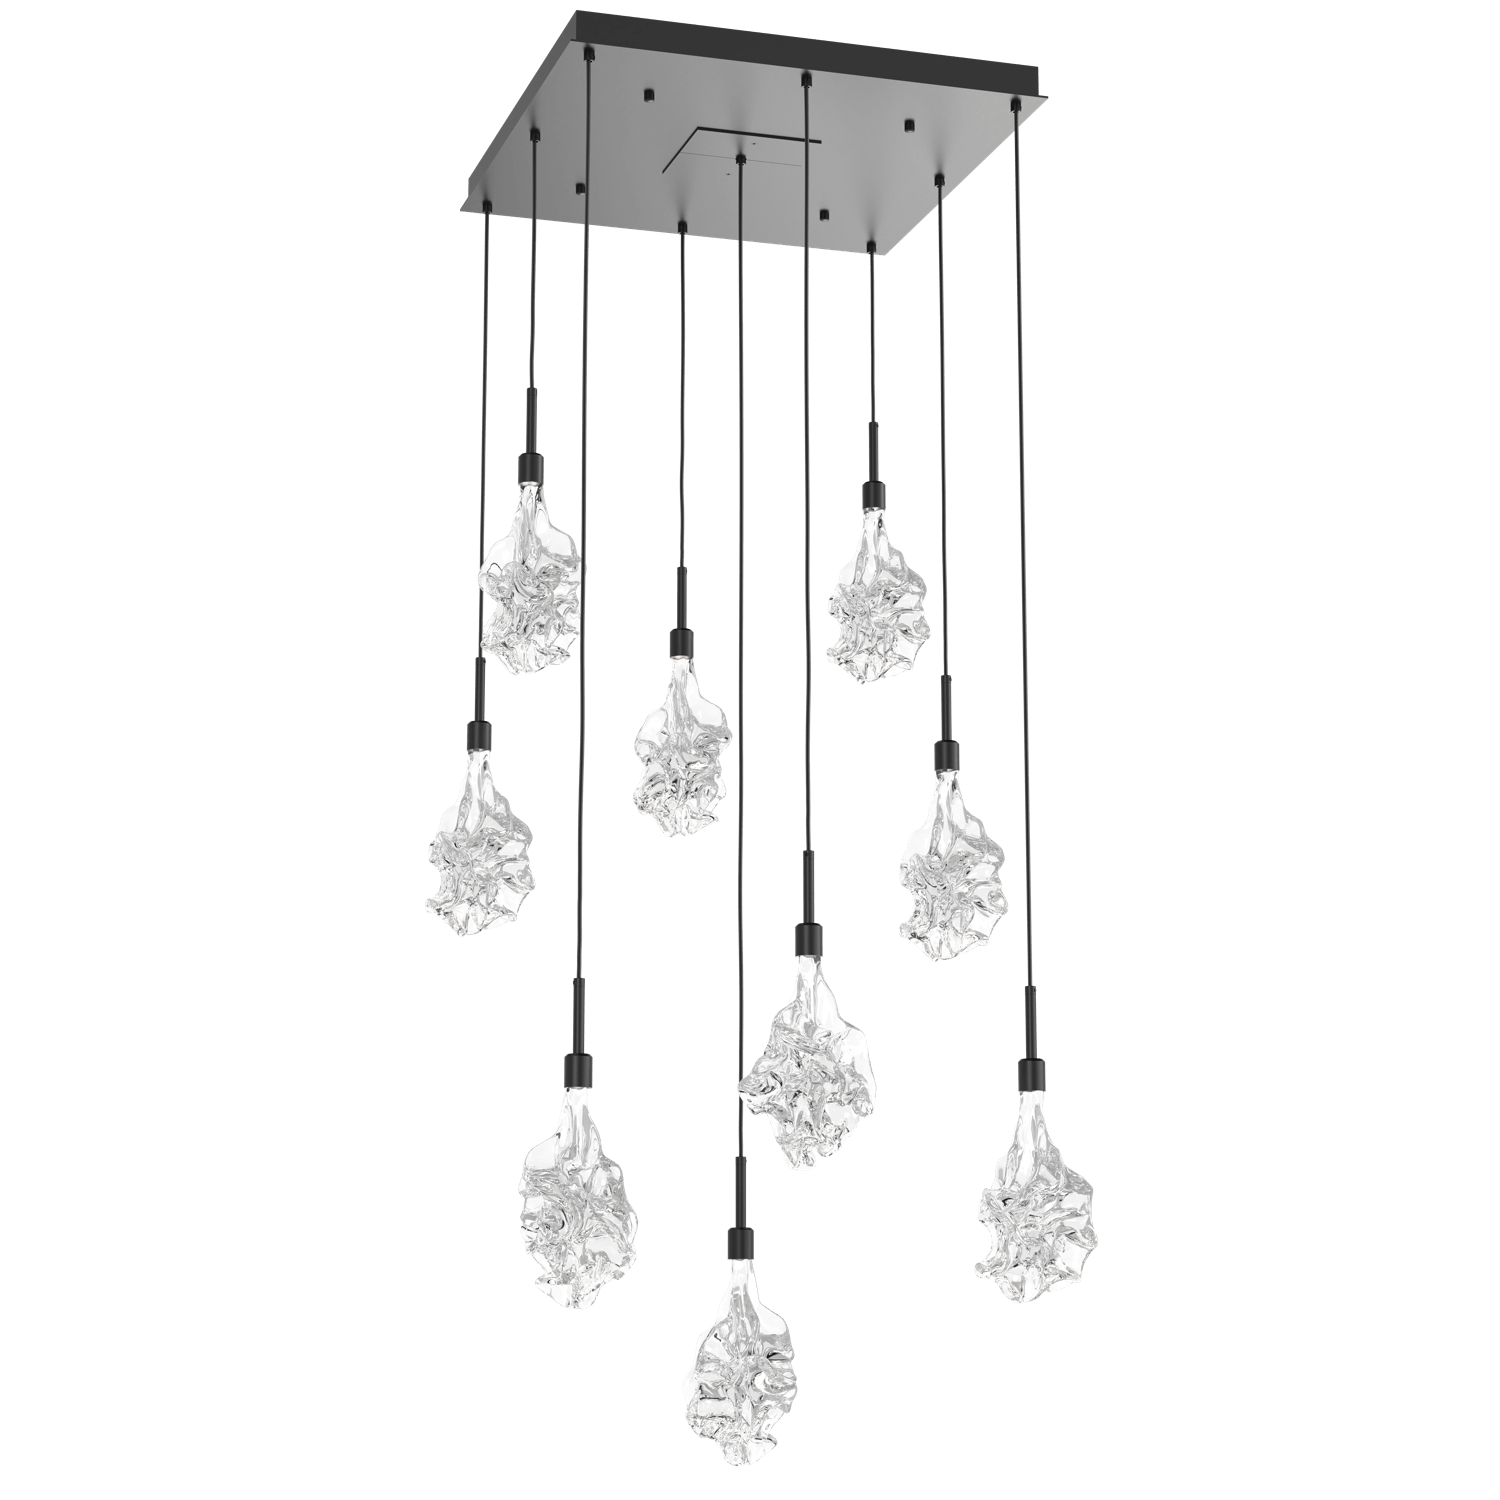 CHB0059-09-MB-Hammerton-Studio-Blossom-9-light-square-pendant-chandelier-with-matte-black-finish-and-clear-handblown-crystal-glass-shades-and-LED-lamping